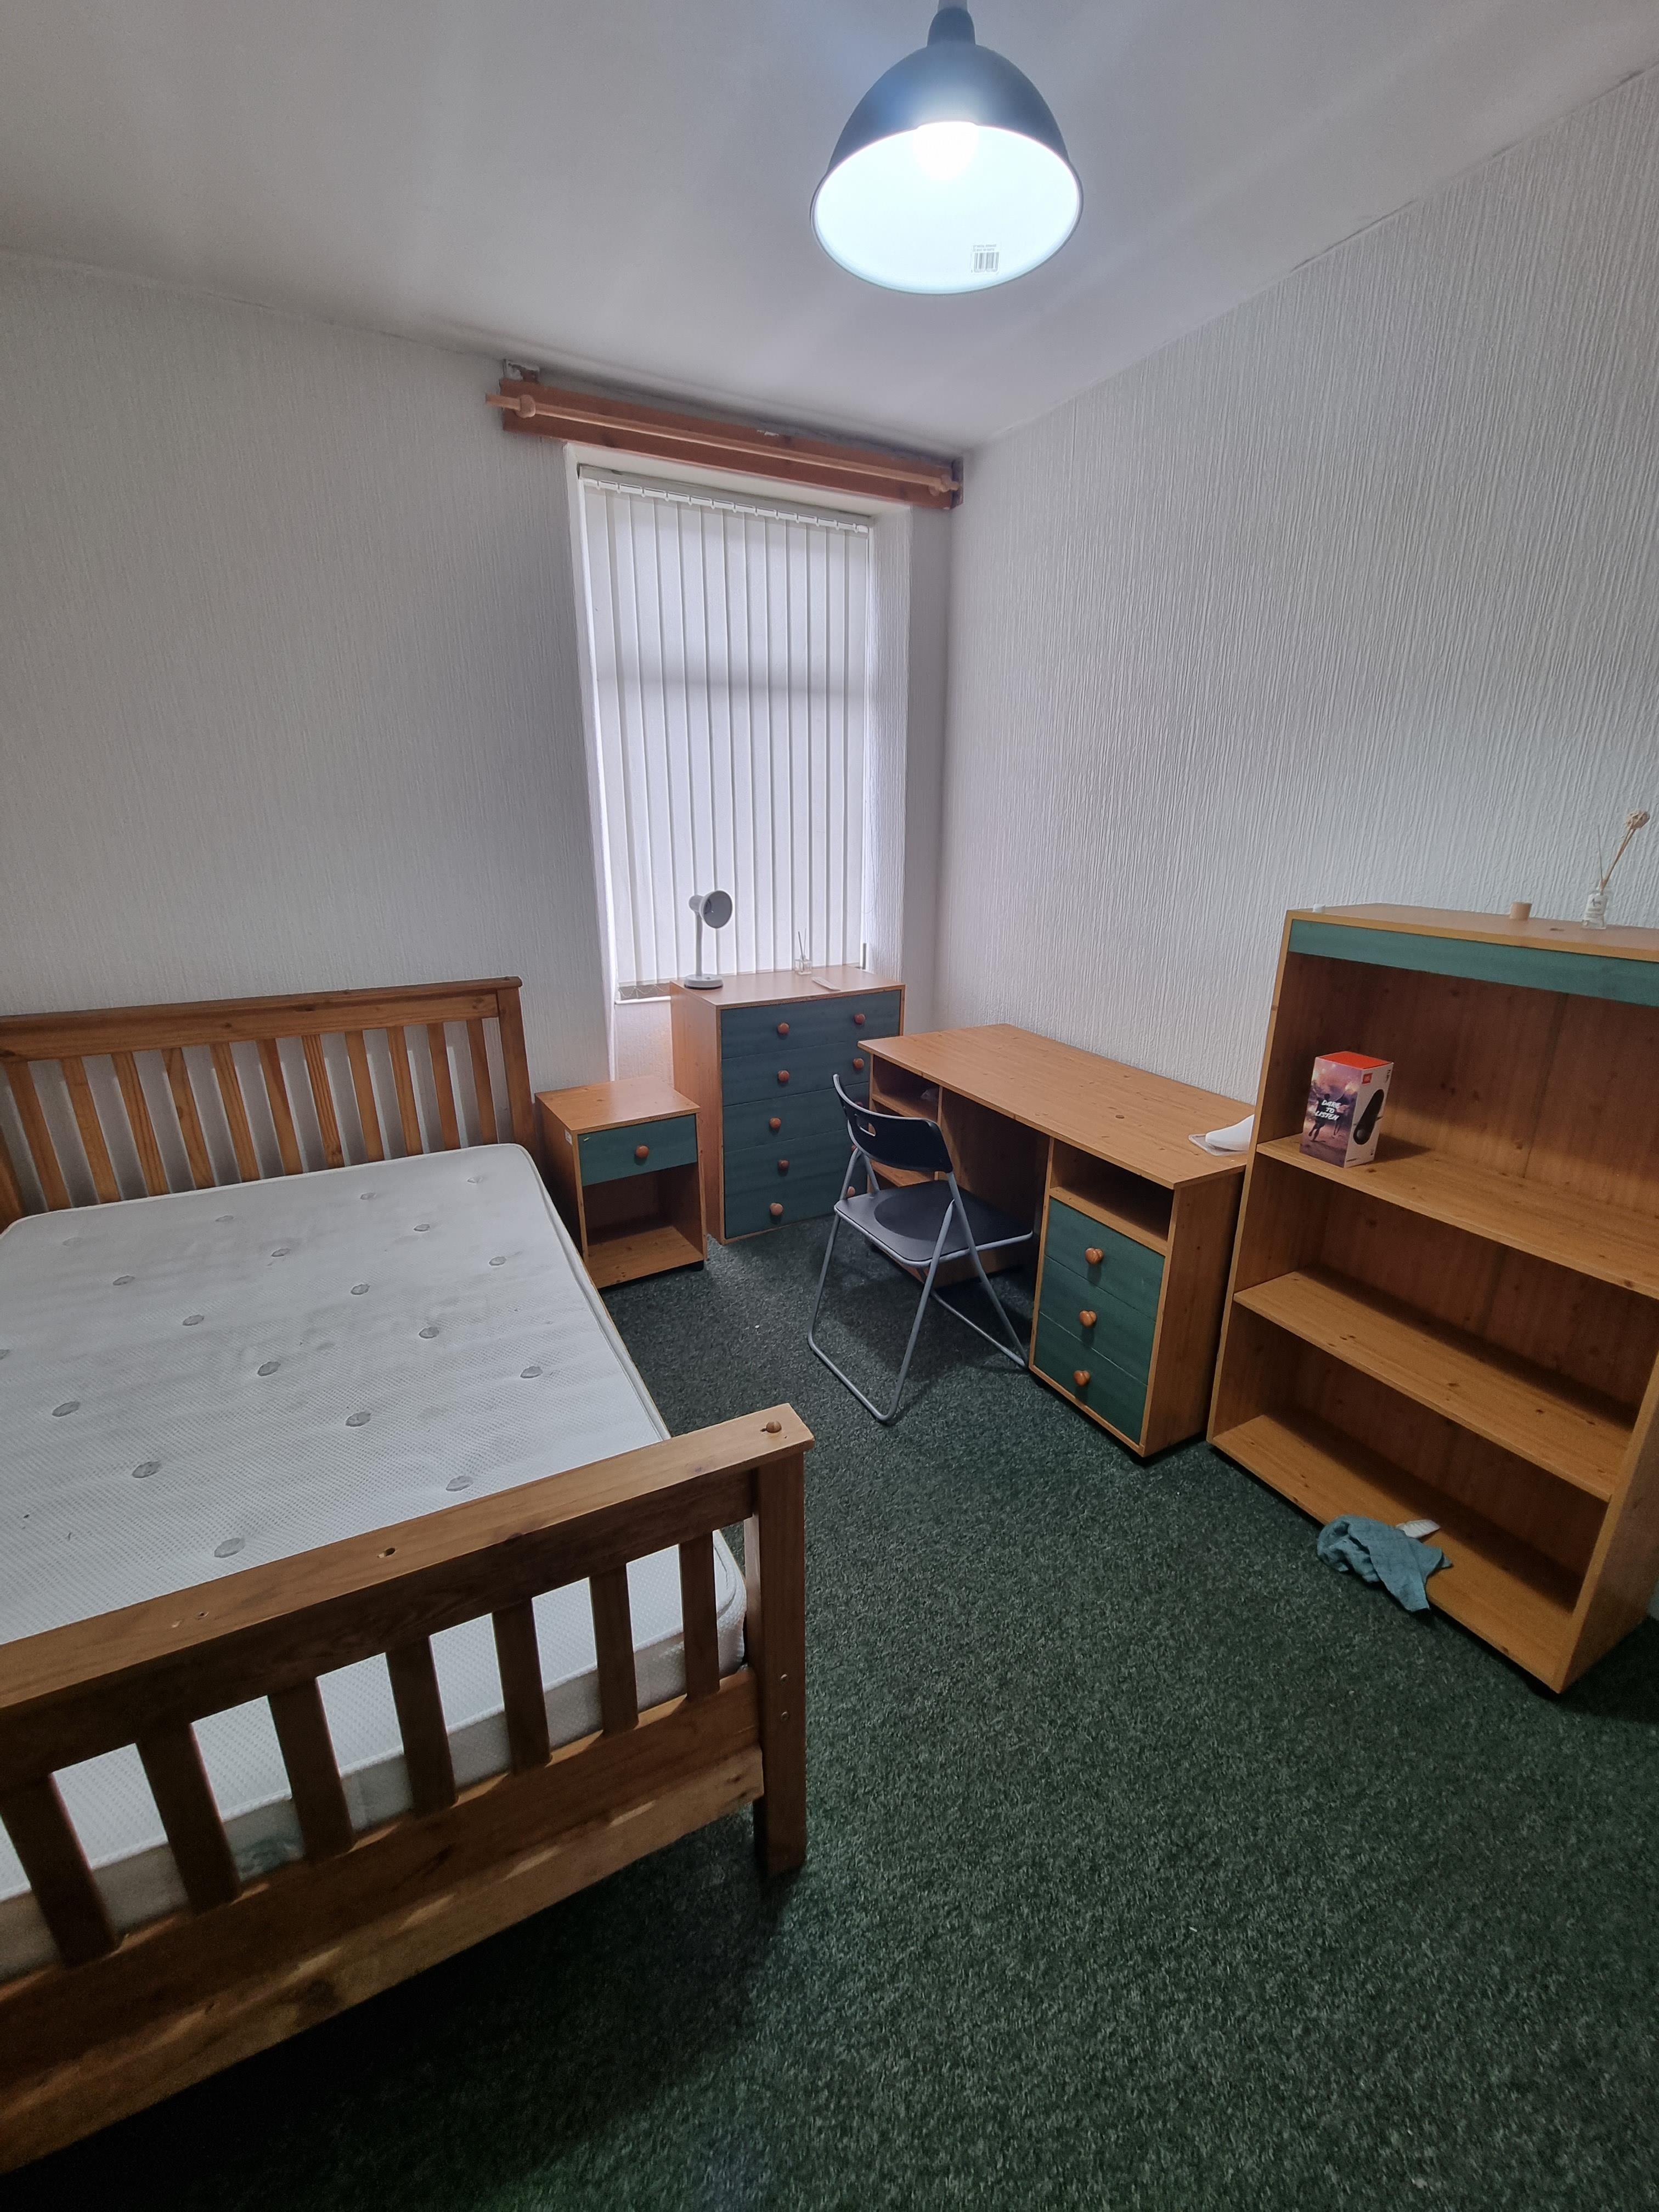 1 bed house / flat share to rent in Wood Road, Treforest 5